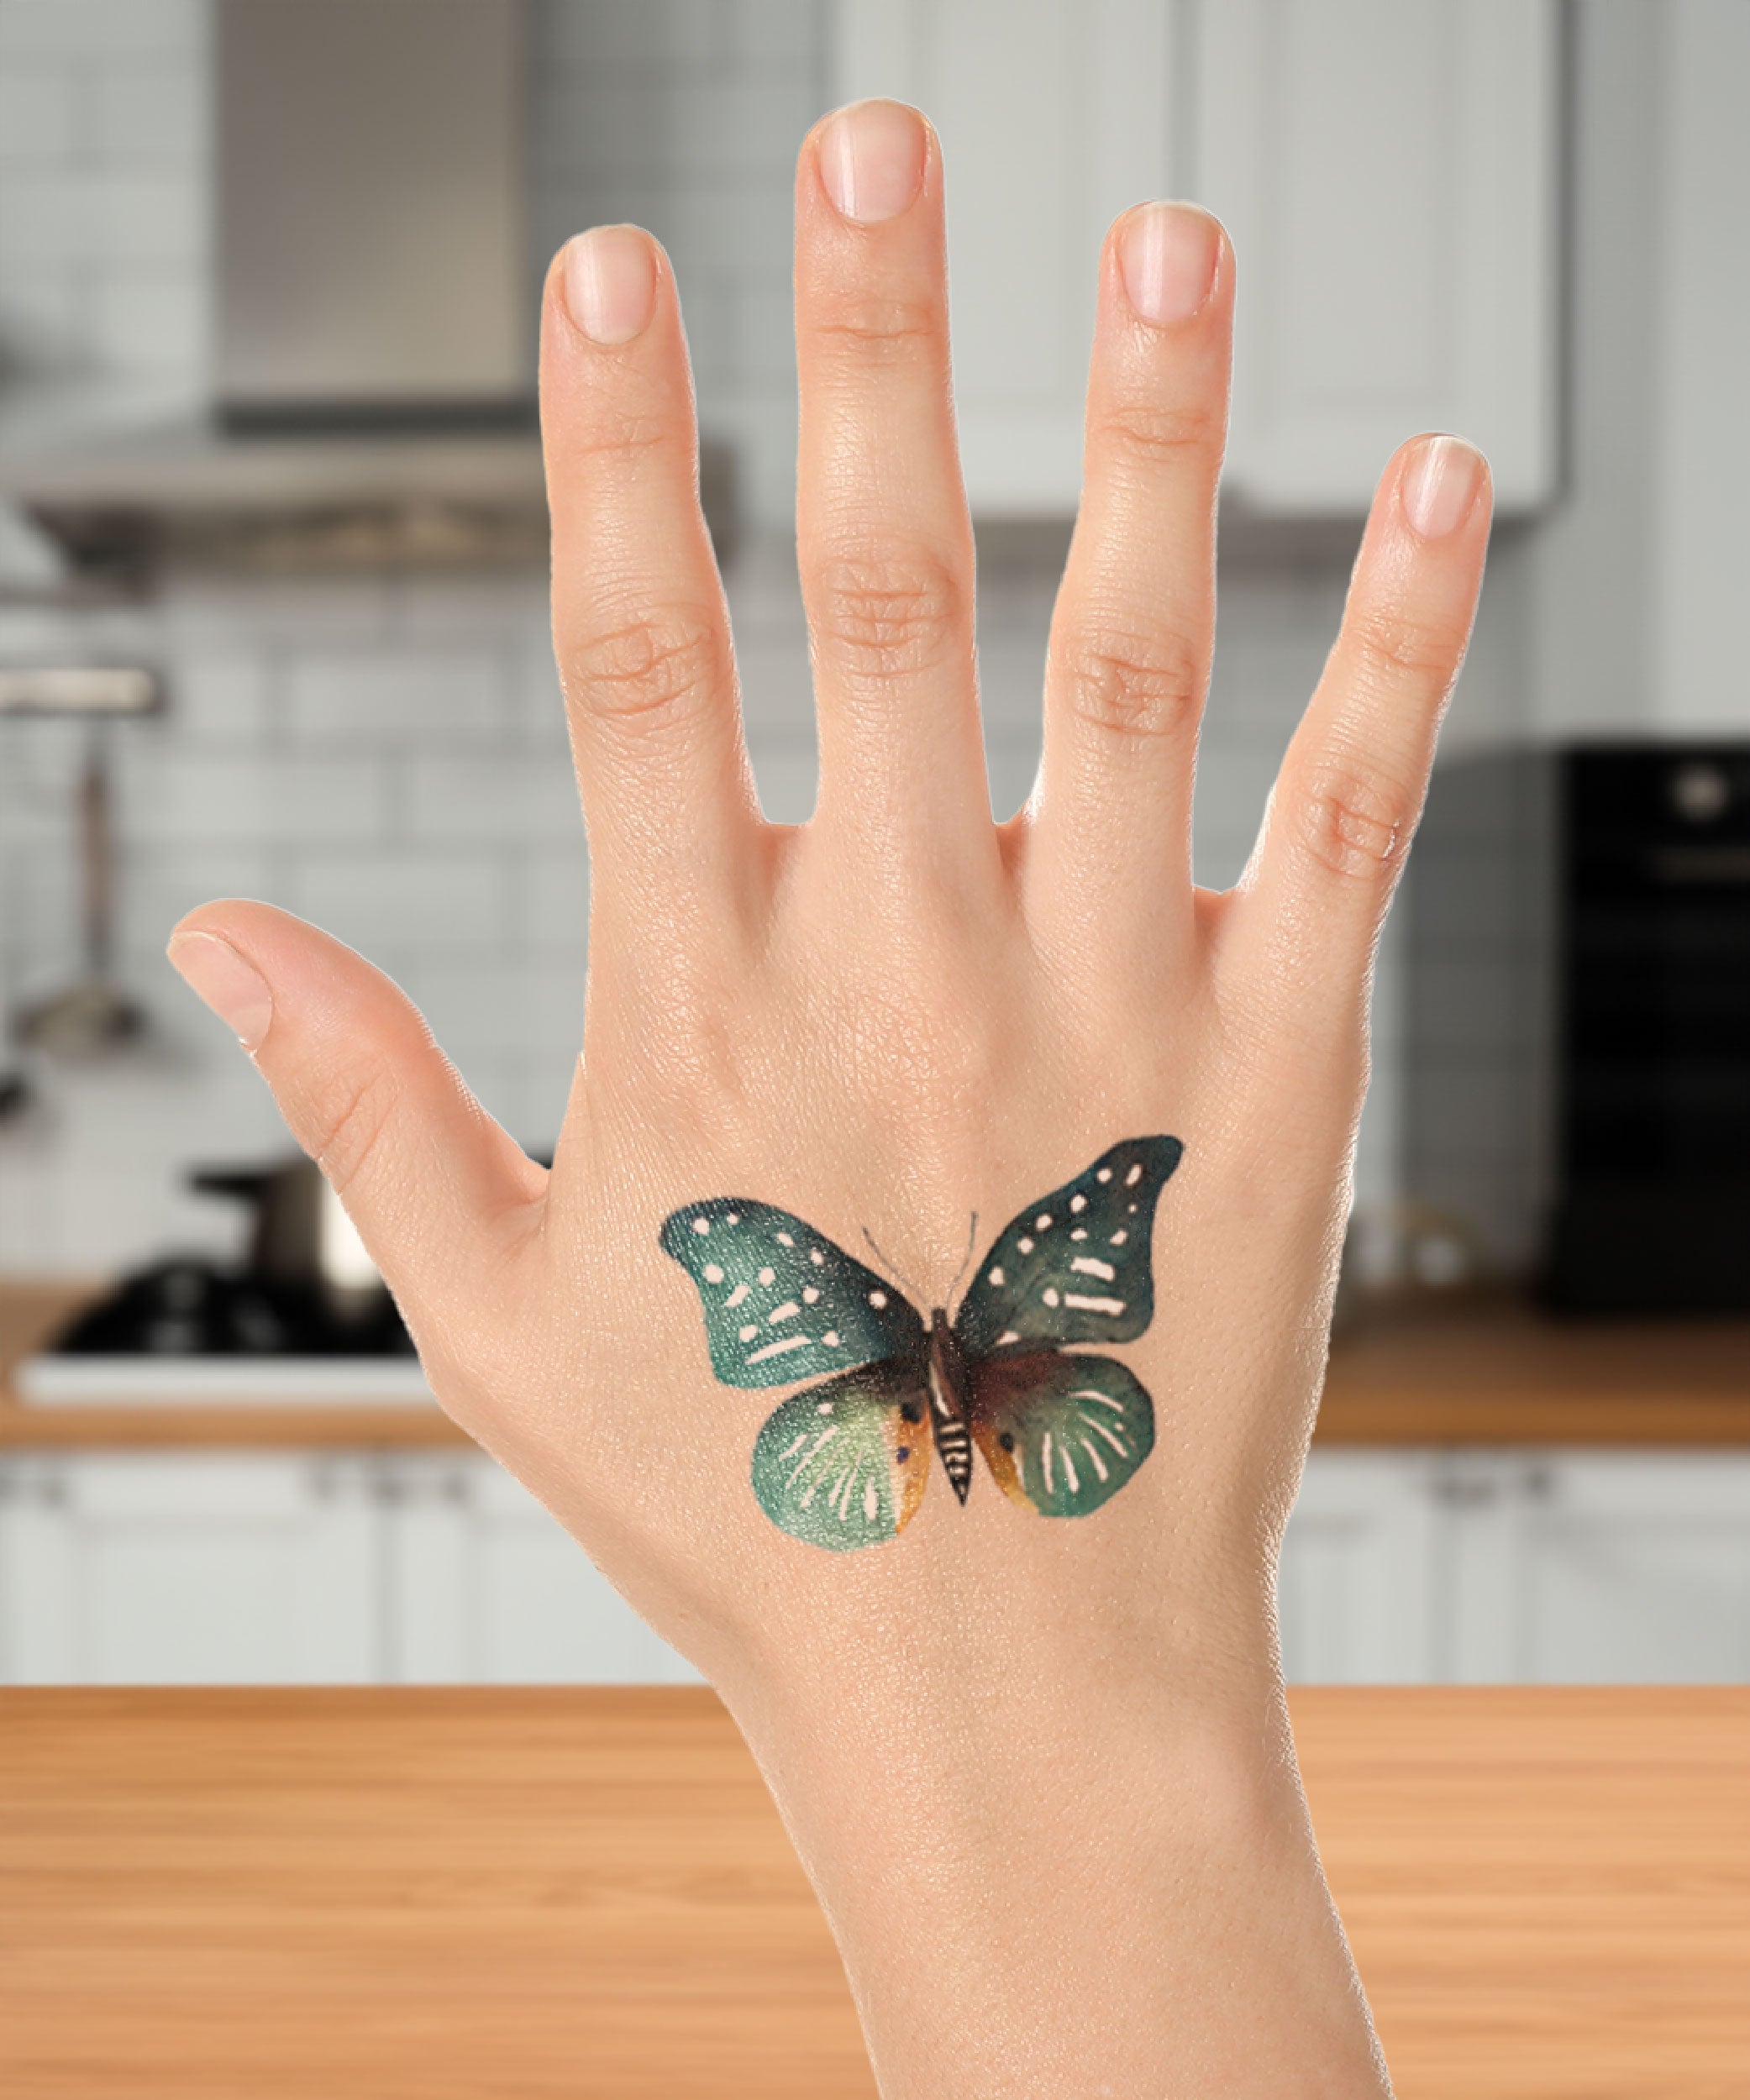 apply temporary tattoos for kids